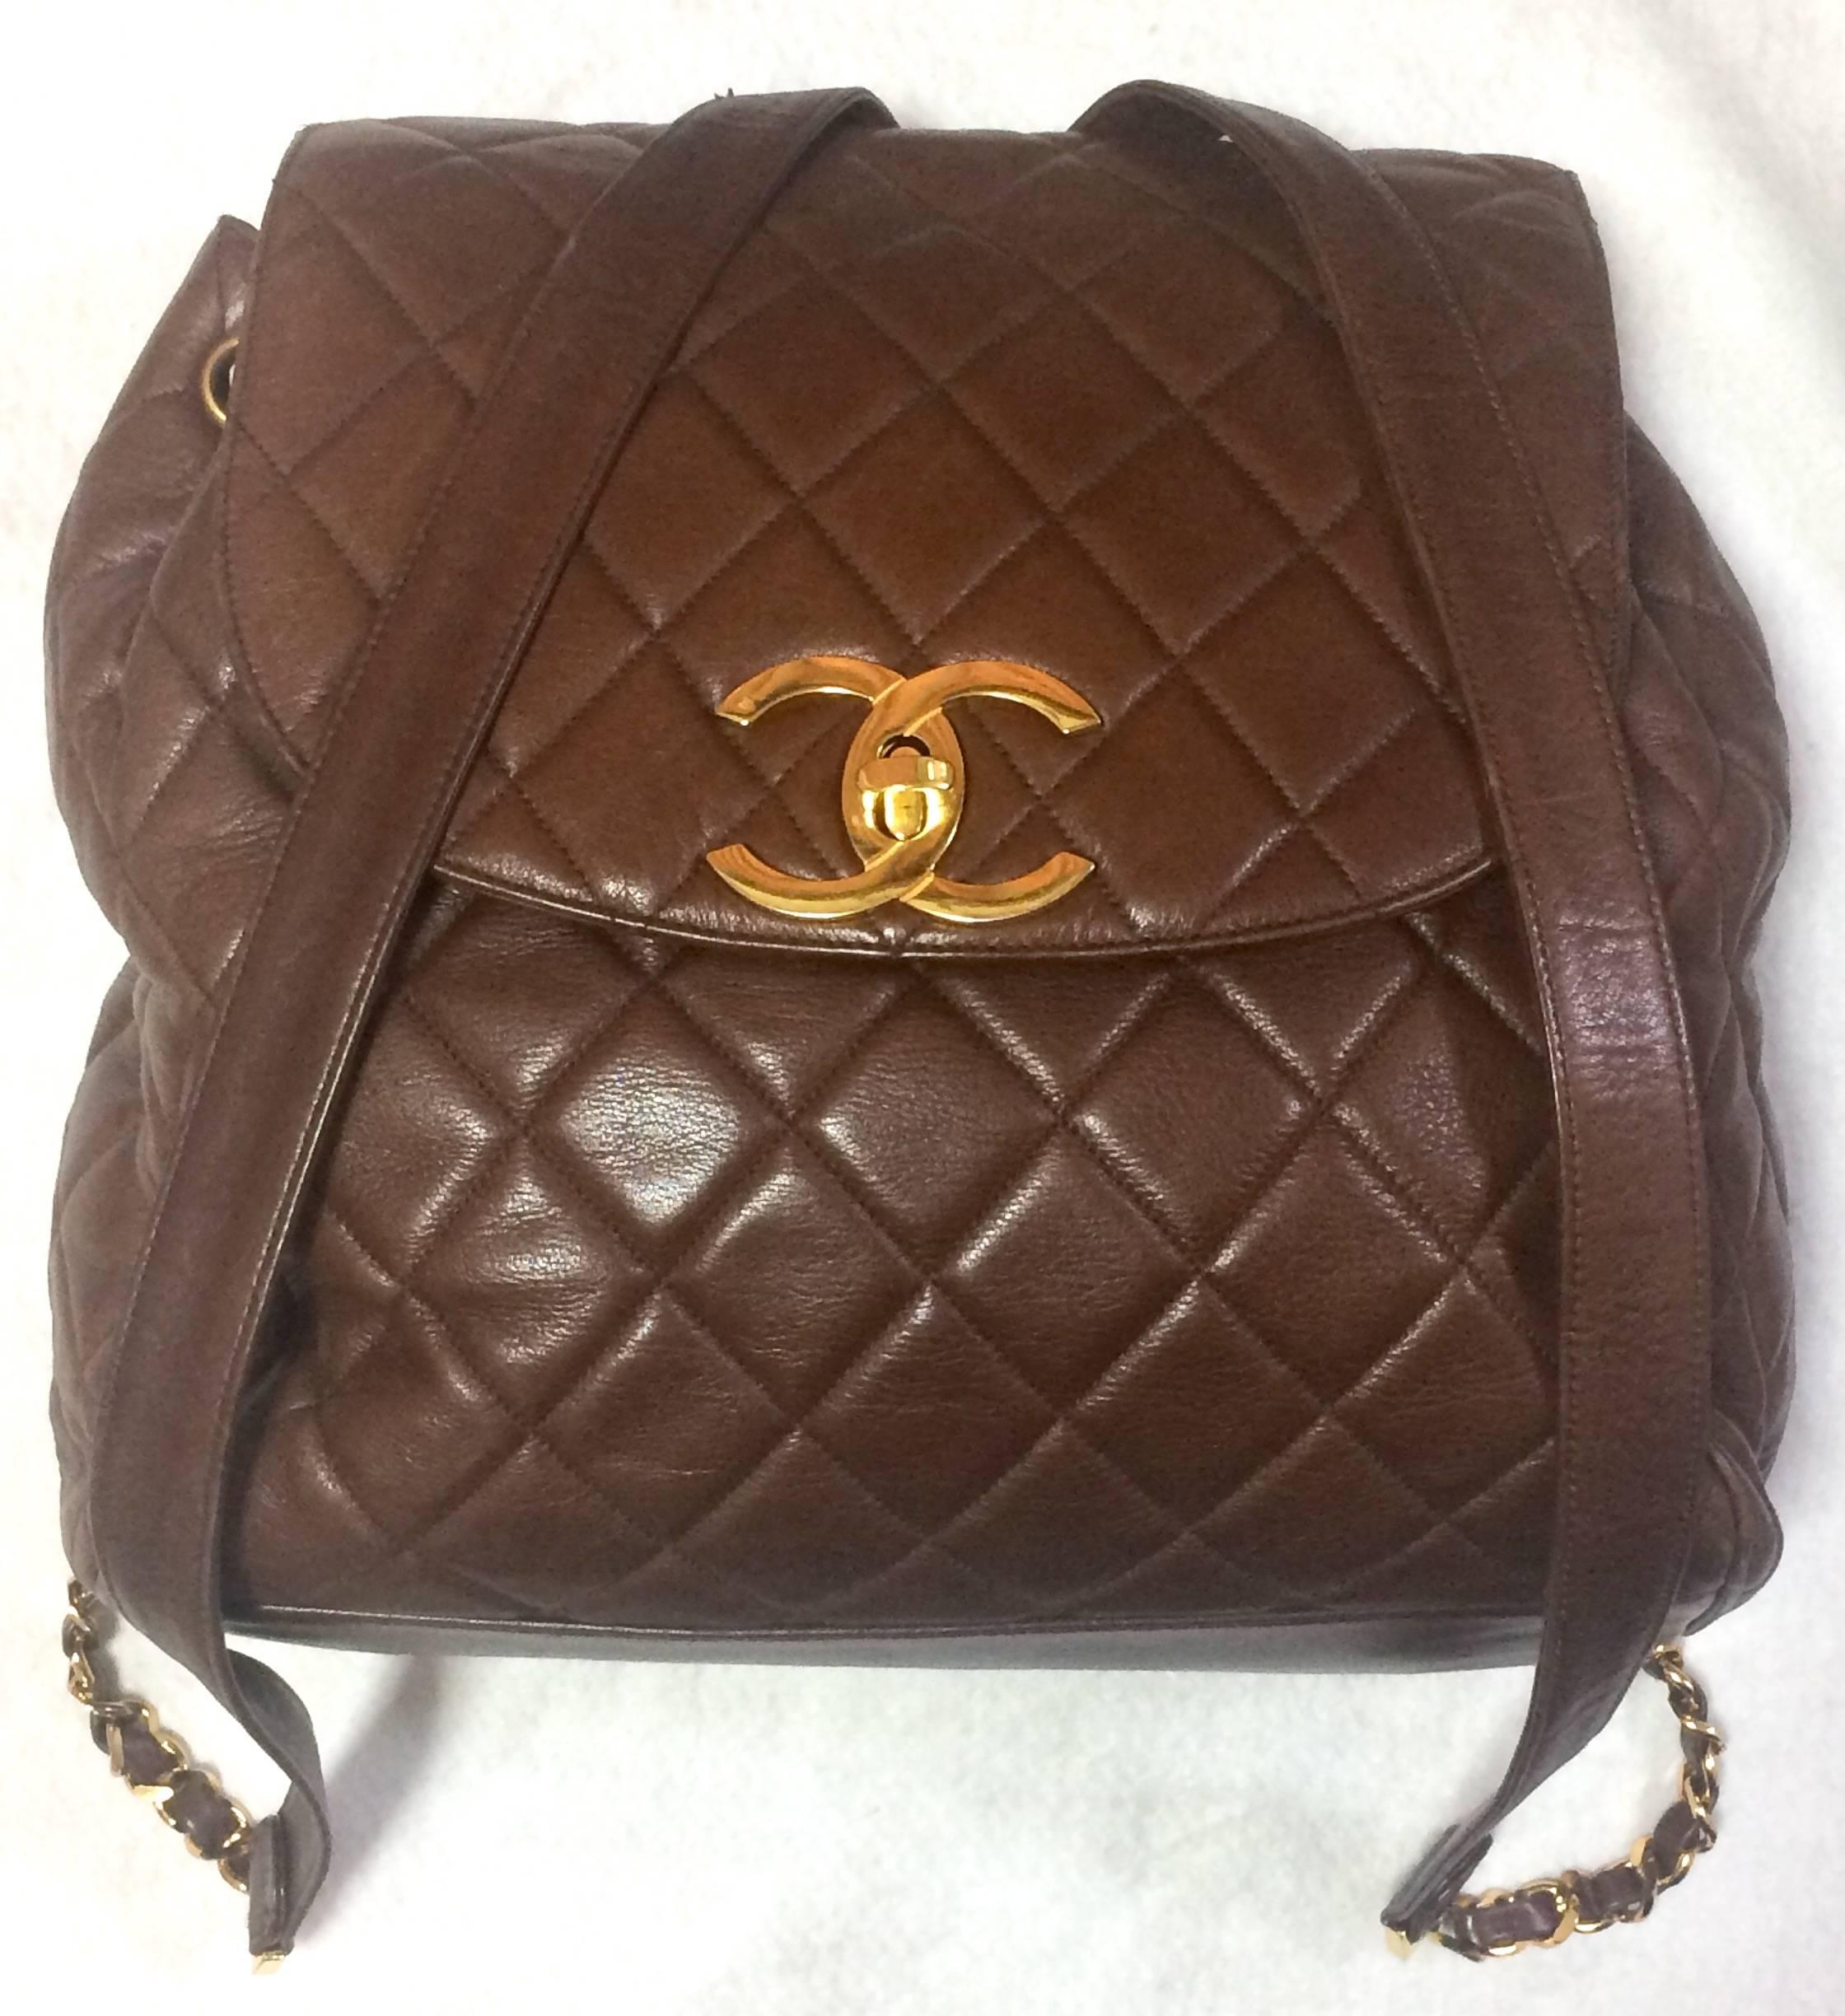 1990s. Vintage CHANEL quilted brown lamb leather backpack with gold chain strap and large CC closure. Classic and popular bag.

Introducing another vintage FAB piece, a large size backpack in brown color lambskin with a large gold tone CC